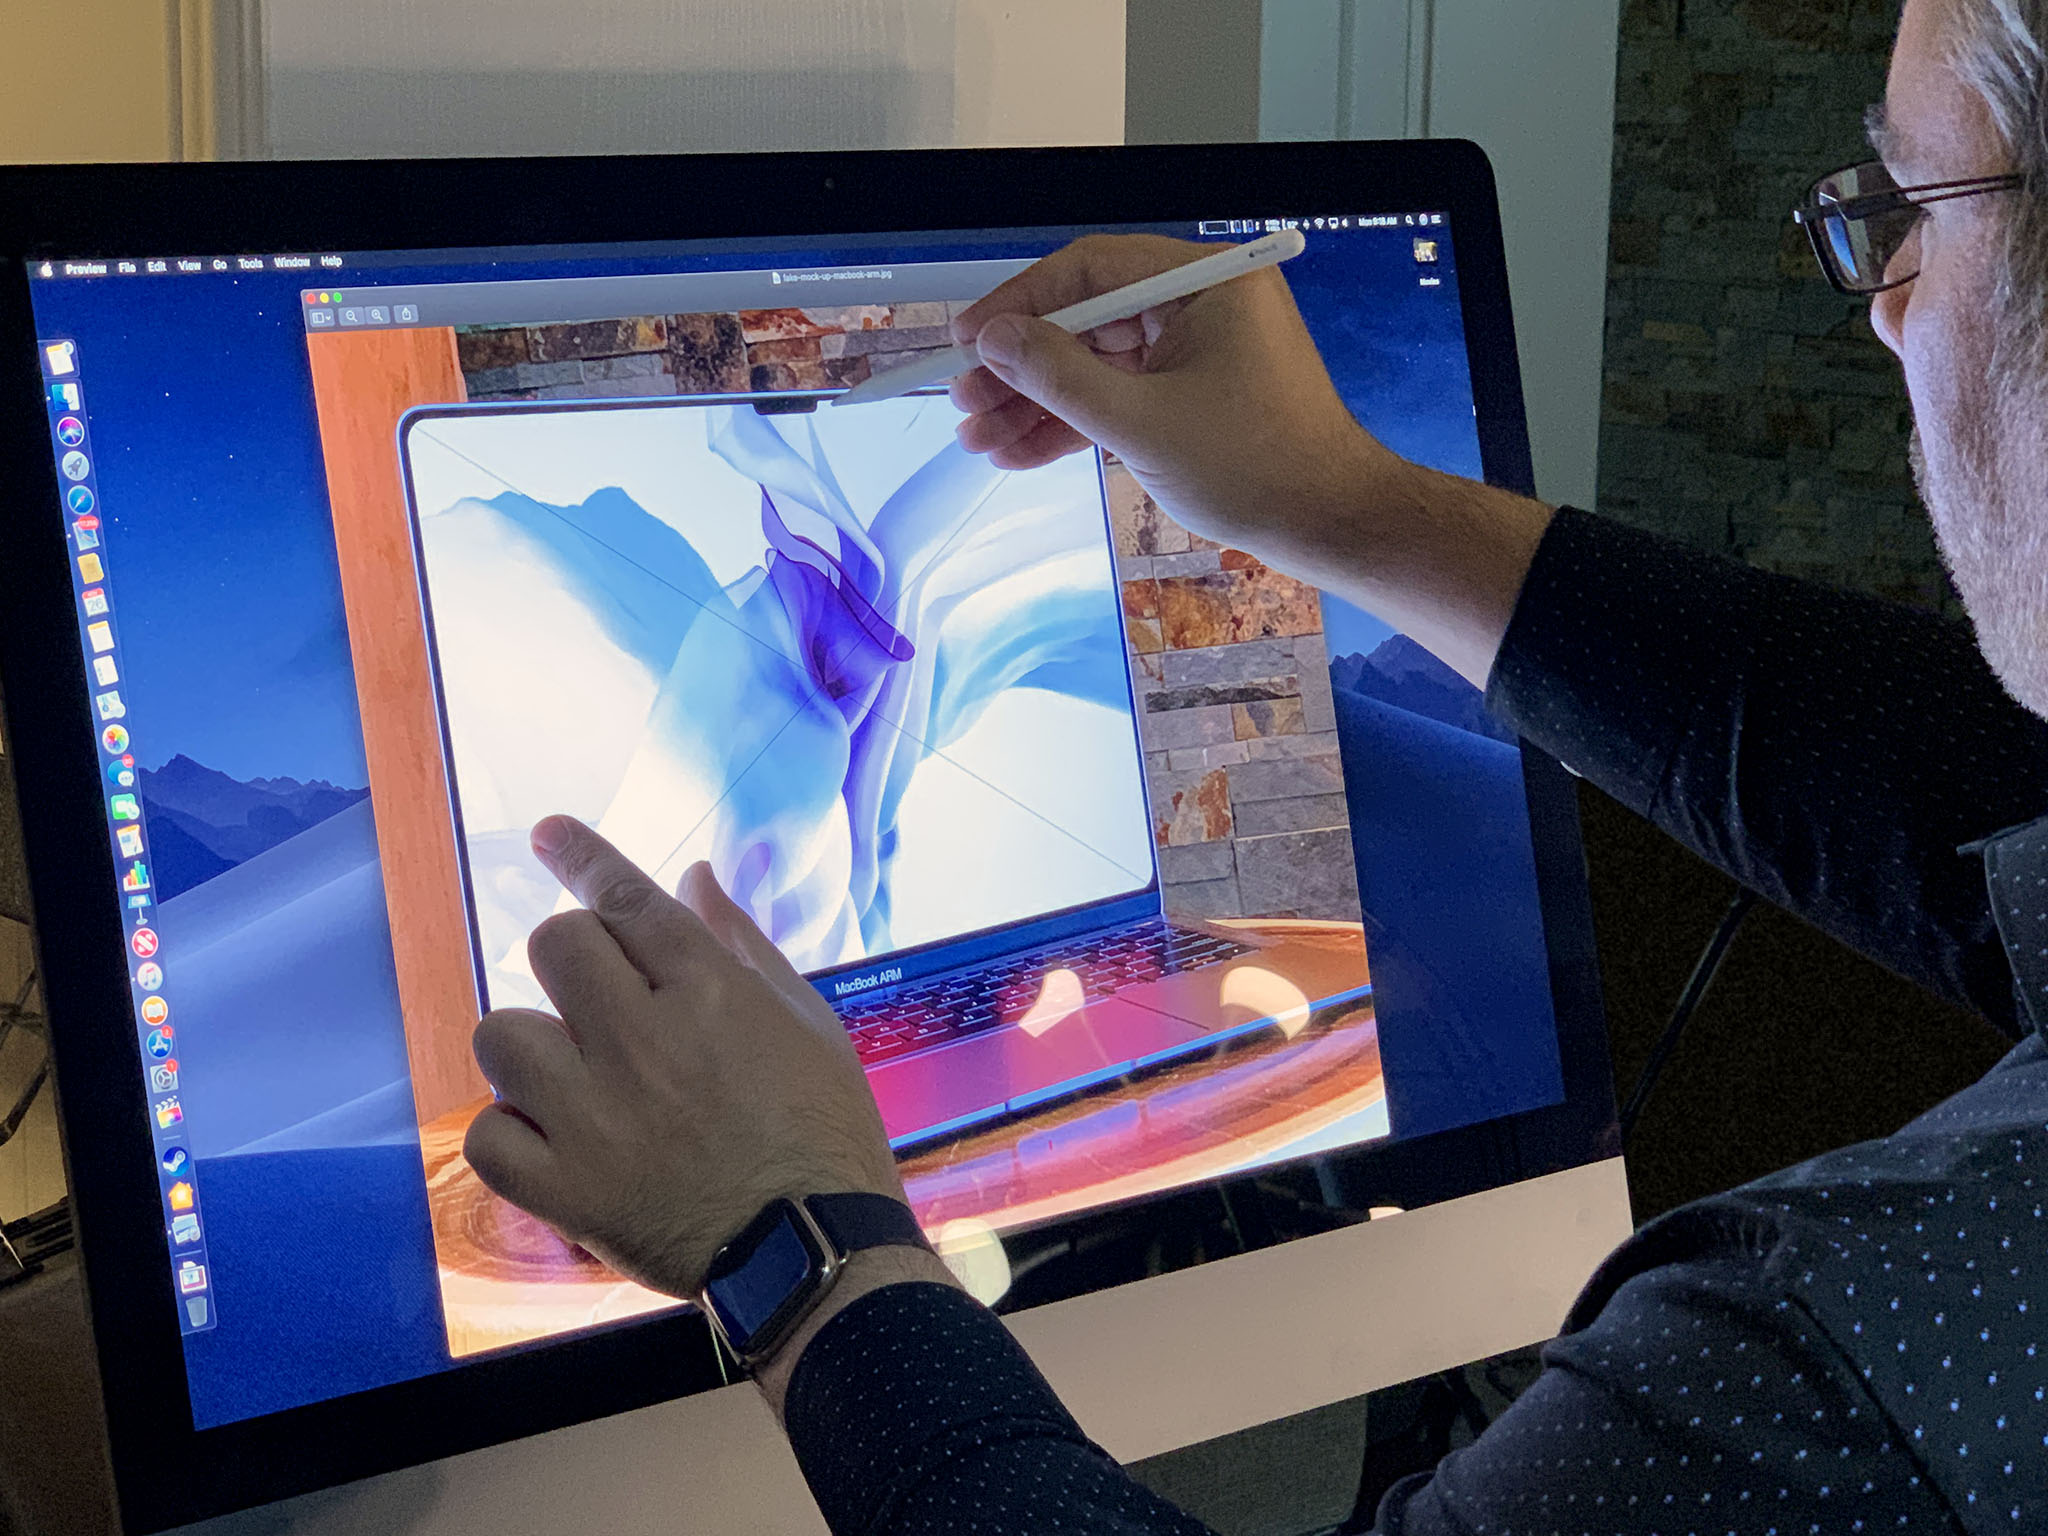 Apple's Work on Touchscreen Macs: What We Know So Far - MacRumors